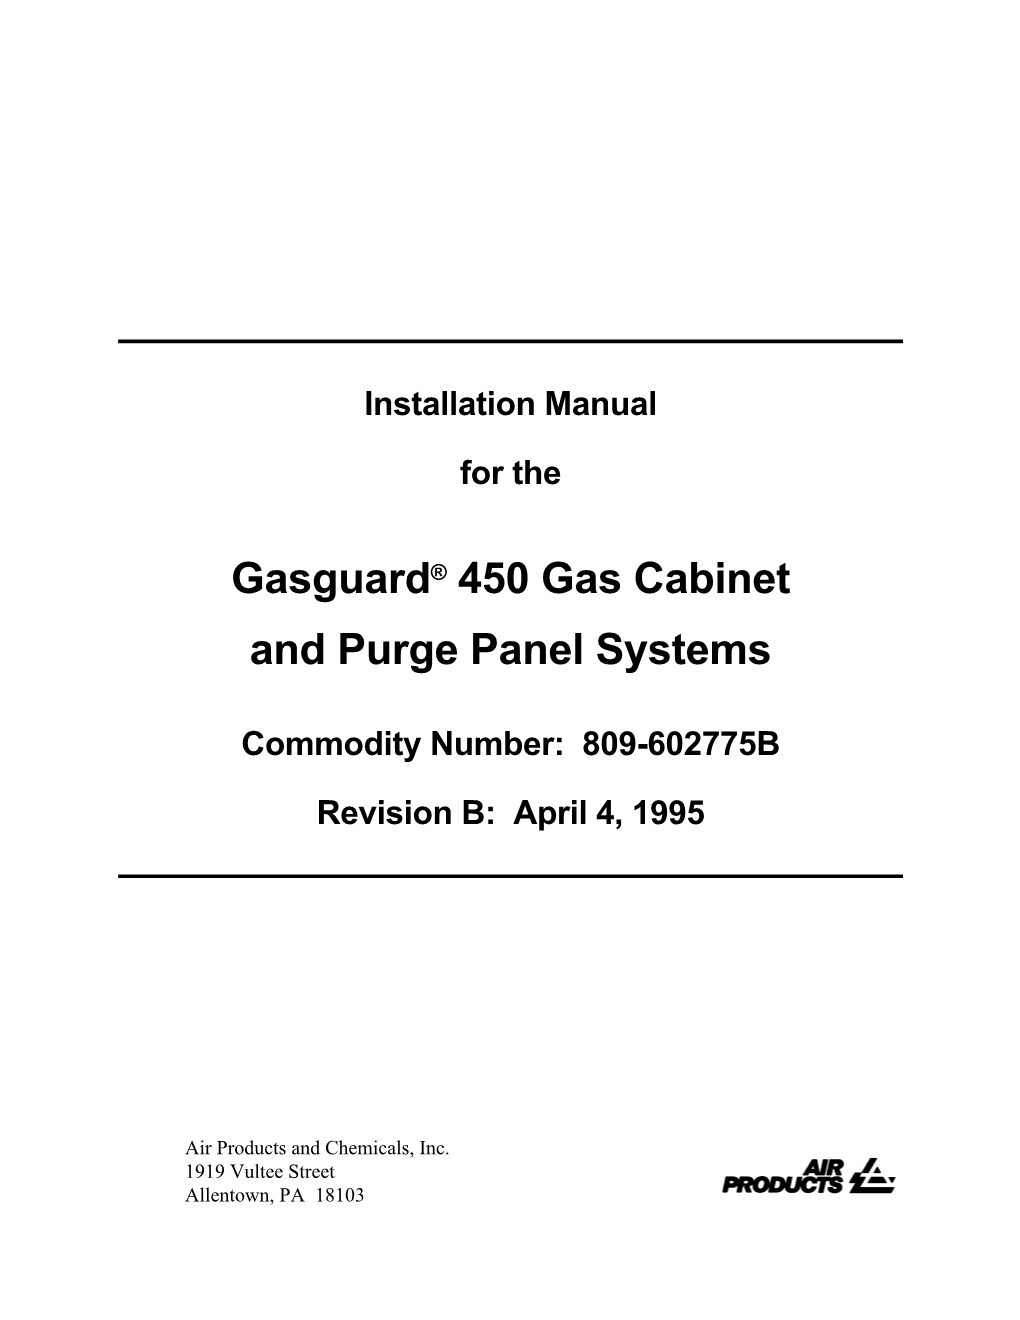 Gasguard® 450 Gas Cabinet and Purge Panel Systems